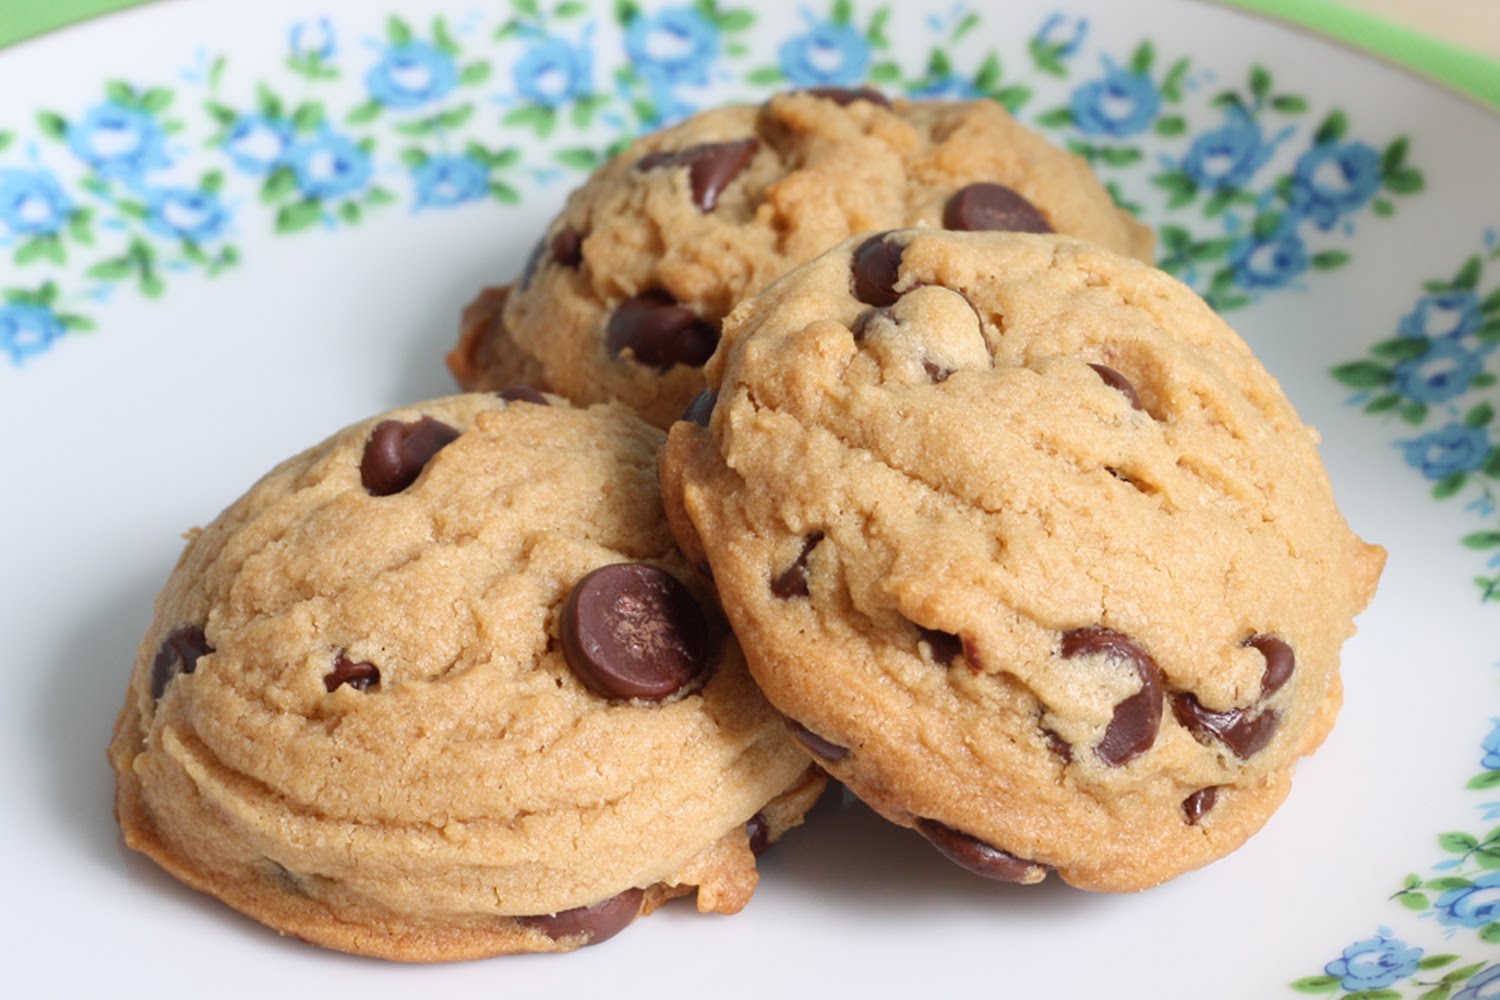 peanut brown adapted all from light make butter to cookies makes butter with chocolate how  recipes chip sugar cookies peanut